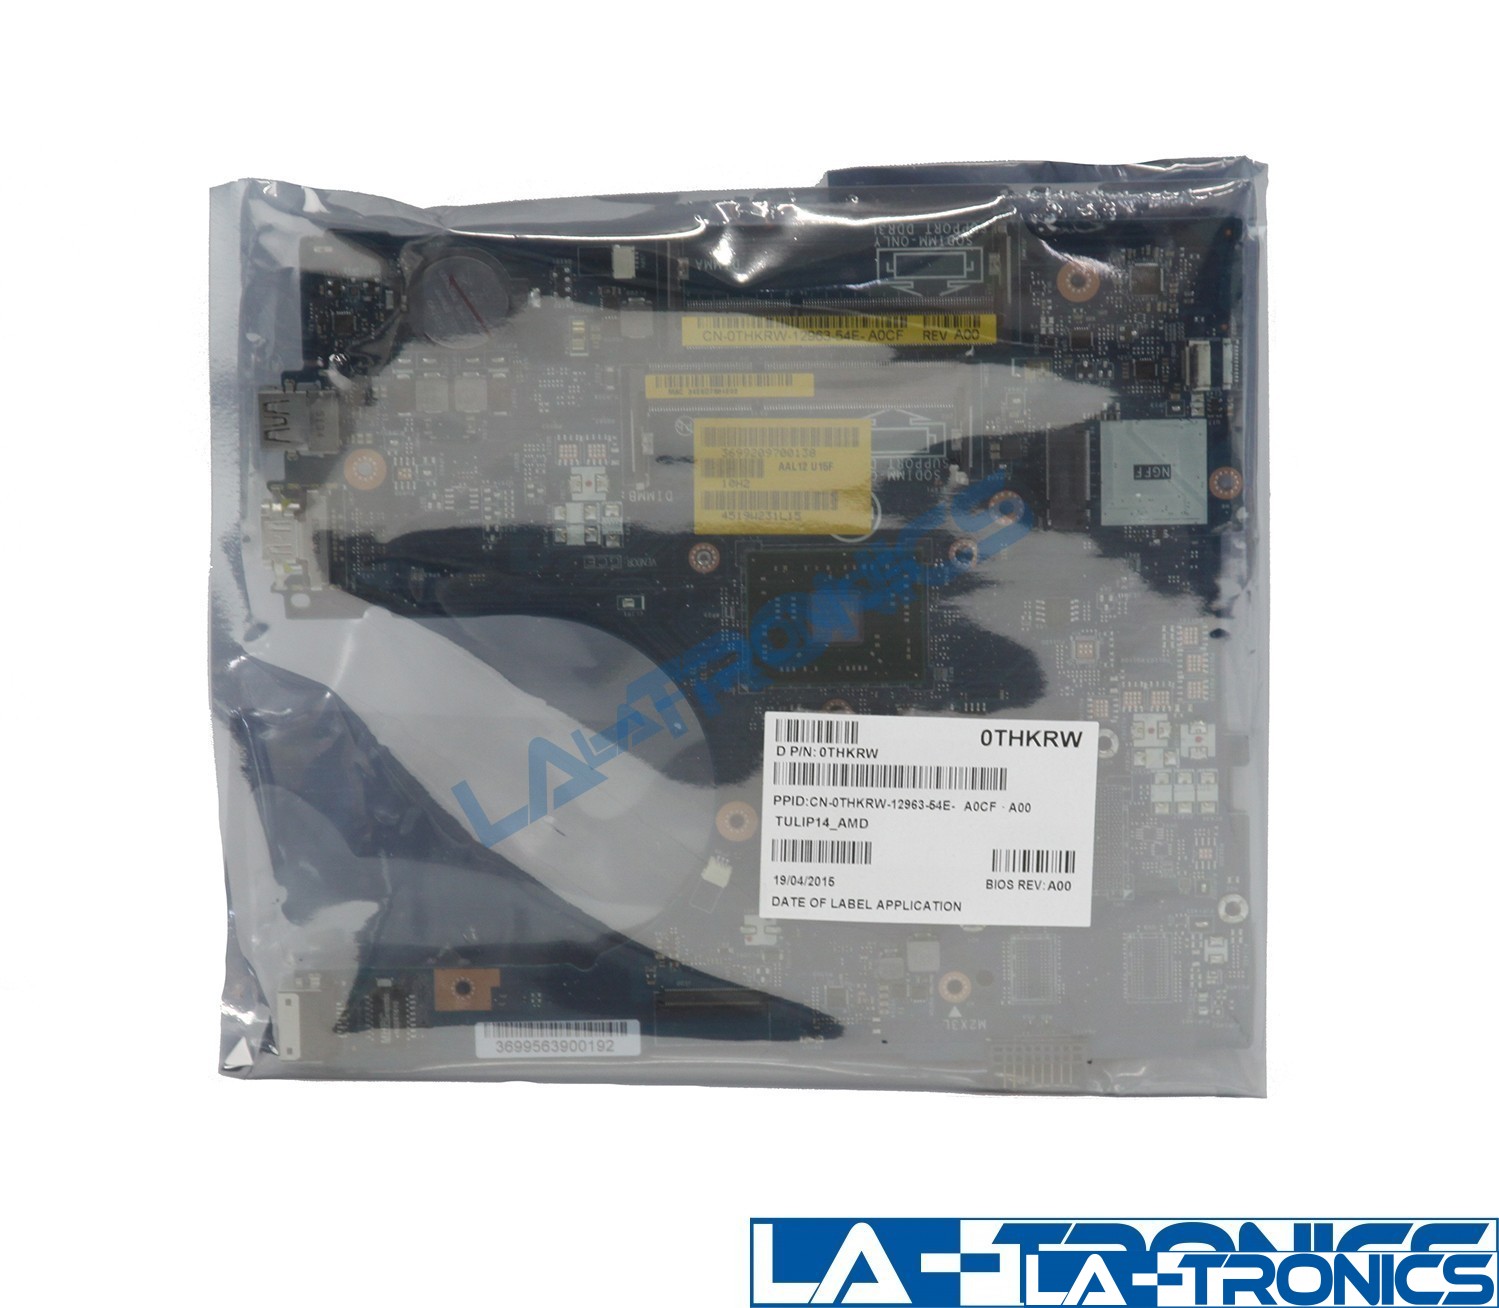 Dell Inspiron 15 5000 5555 Laptop Motherboard AMD A6-7310 2.0GHz THKRW 0THKRW